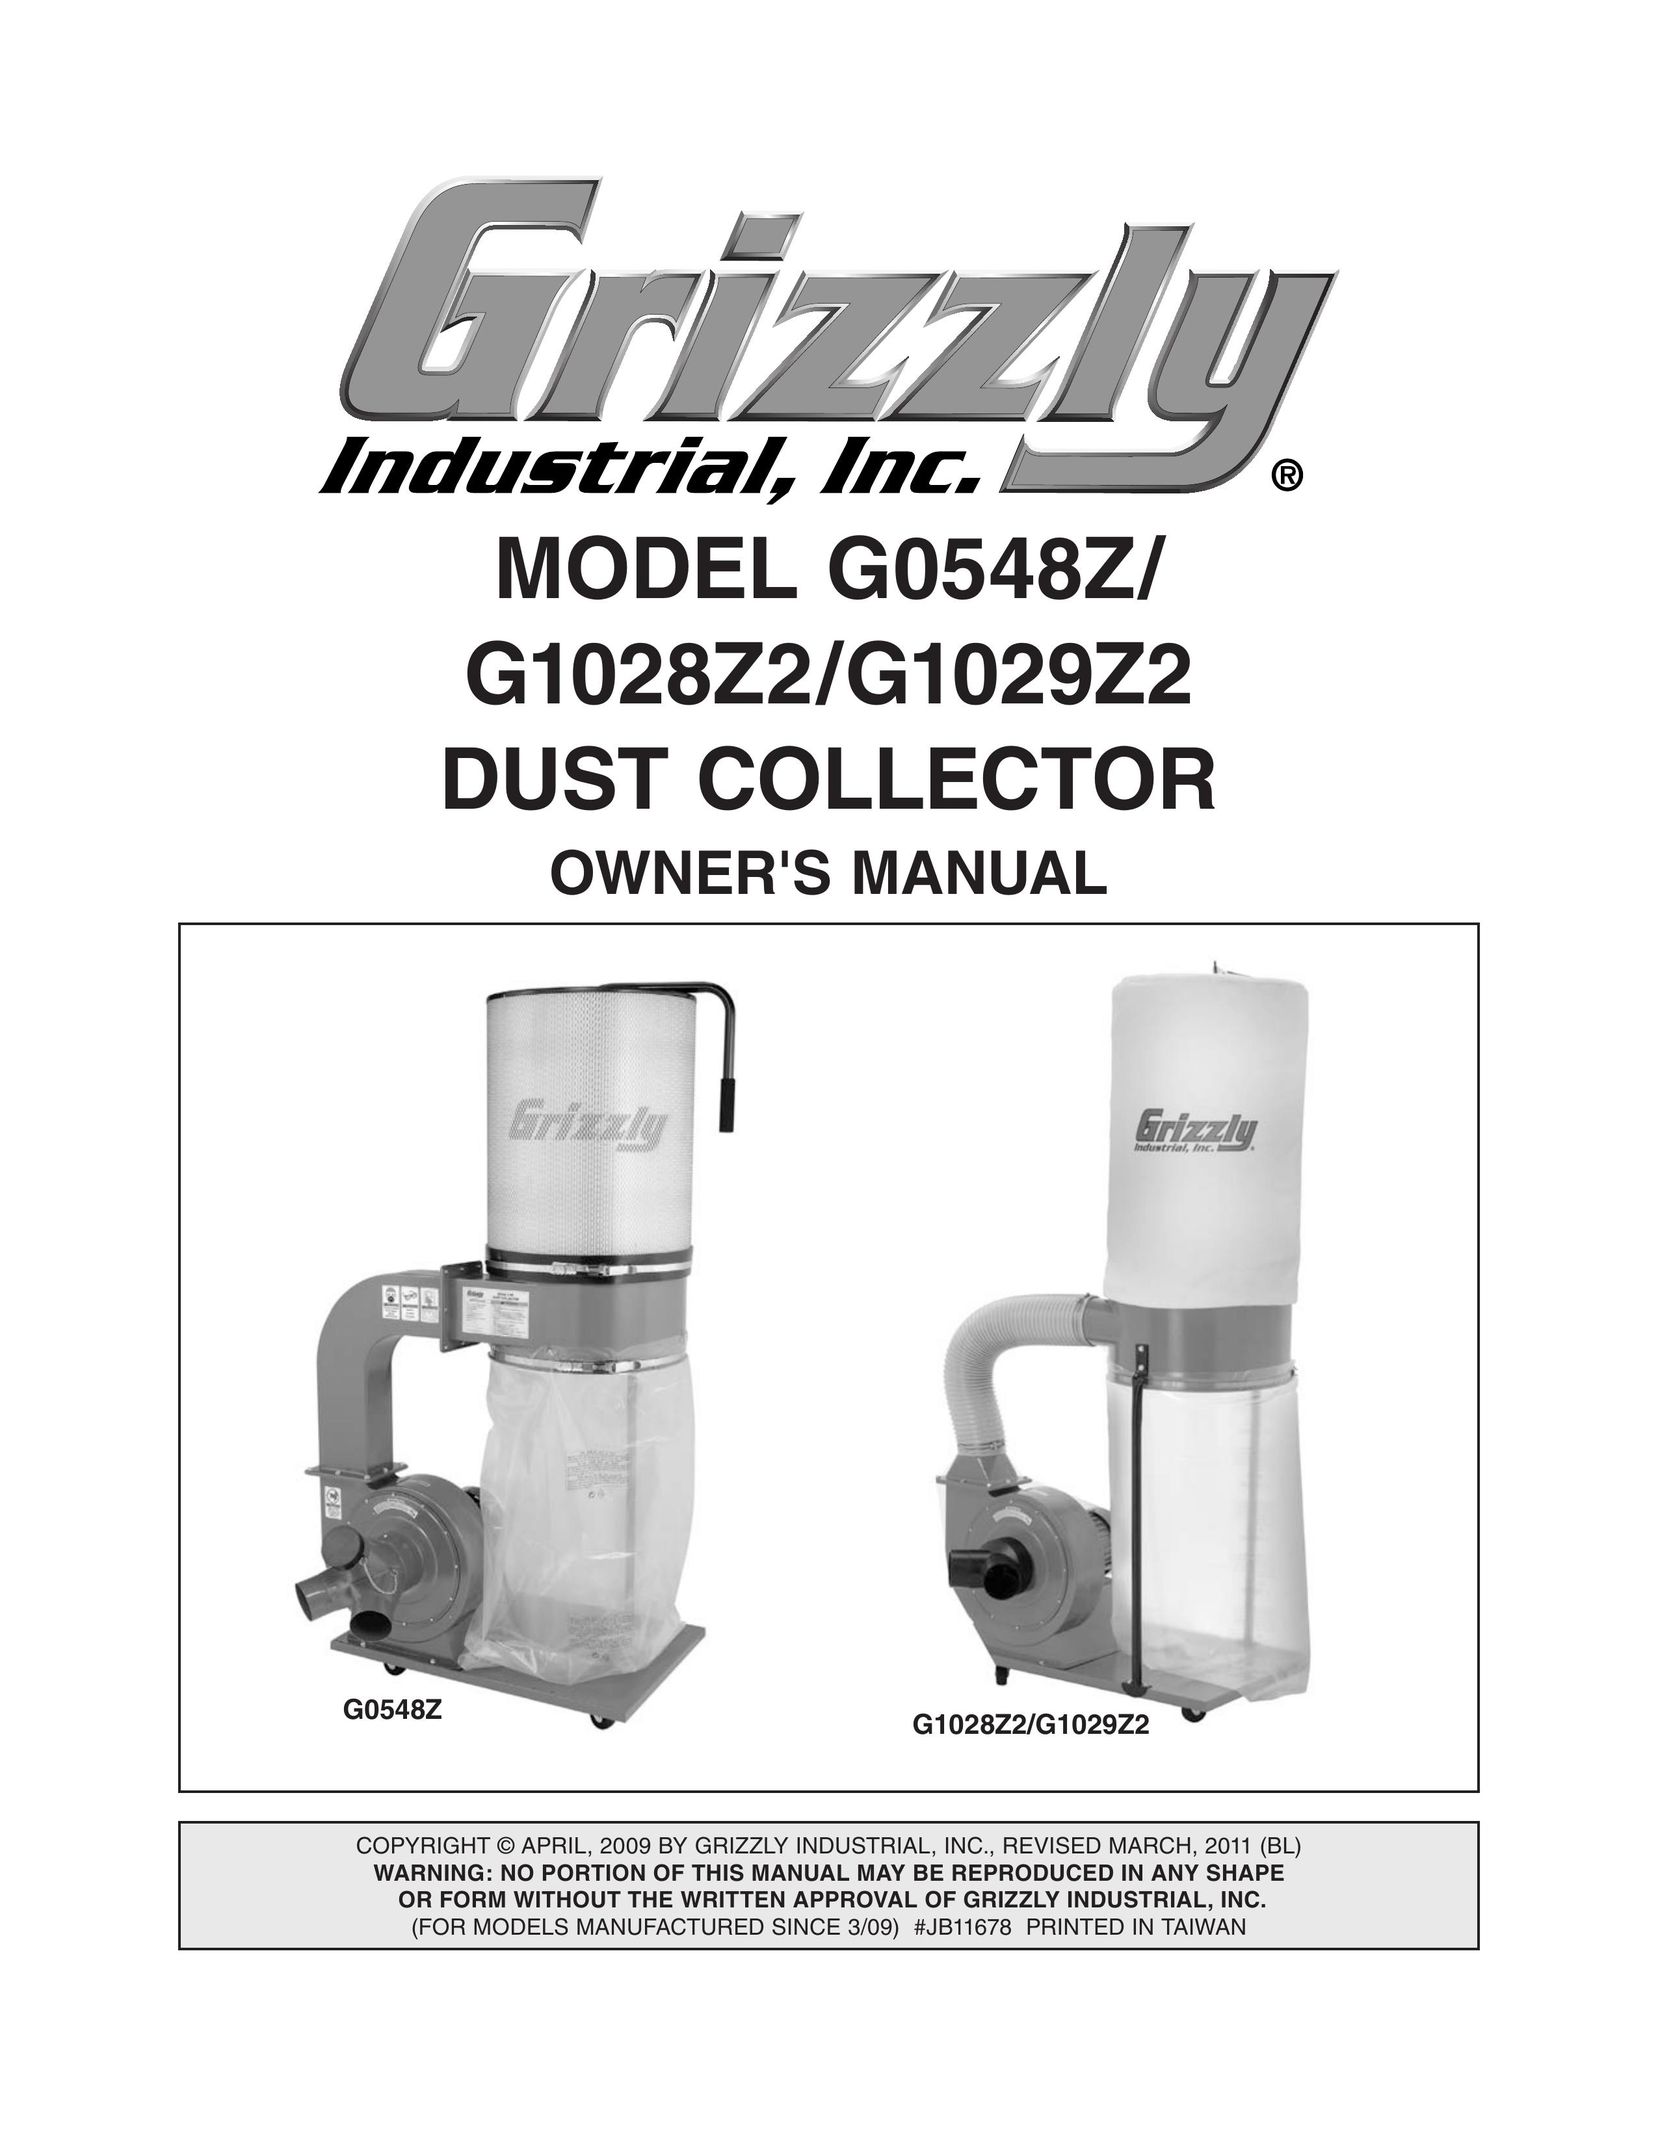 Grizzly G1028Z2 Dust Collector User Manual